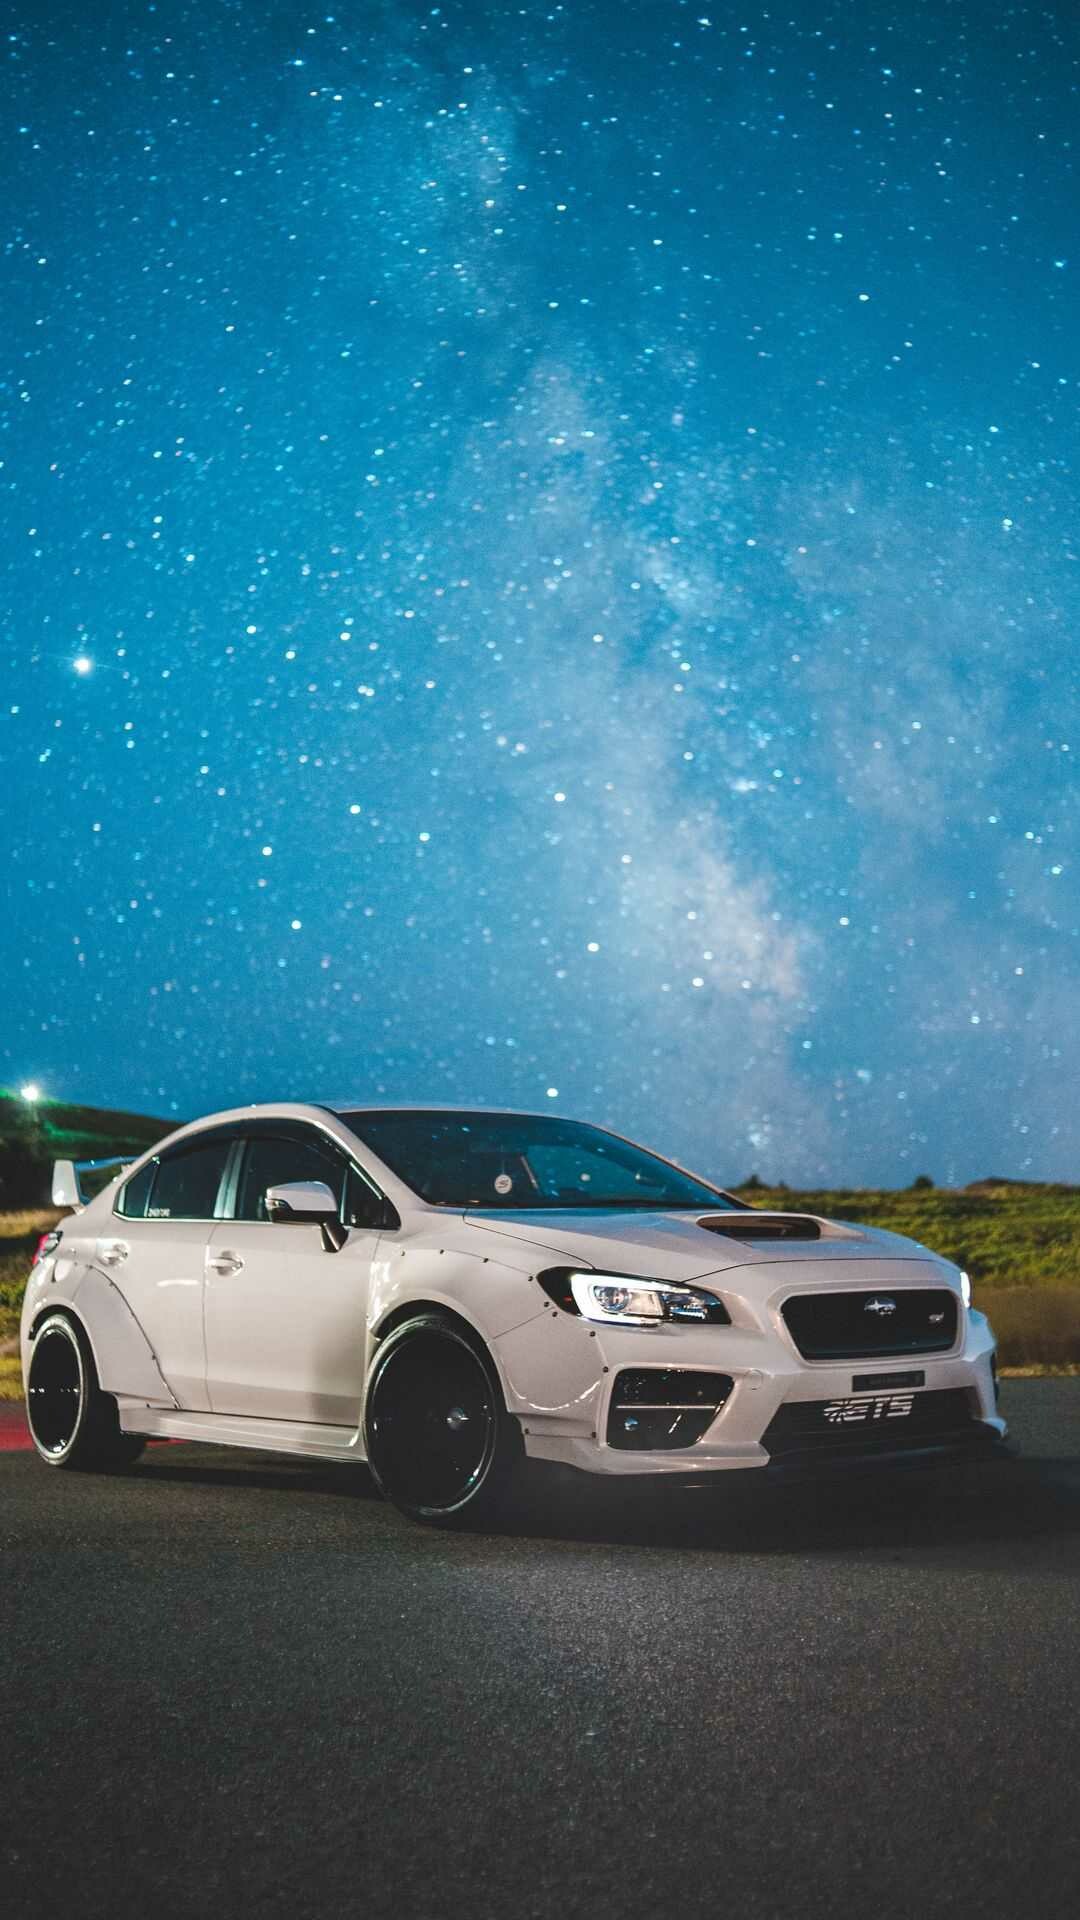 Subaru: Best known as the automaker that builds popular models like the Forester and Outback crossover SUVs, along with cars like the Legacy and Impreza. 1080x1920 Full HD Wallpaper.